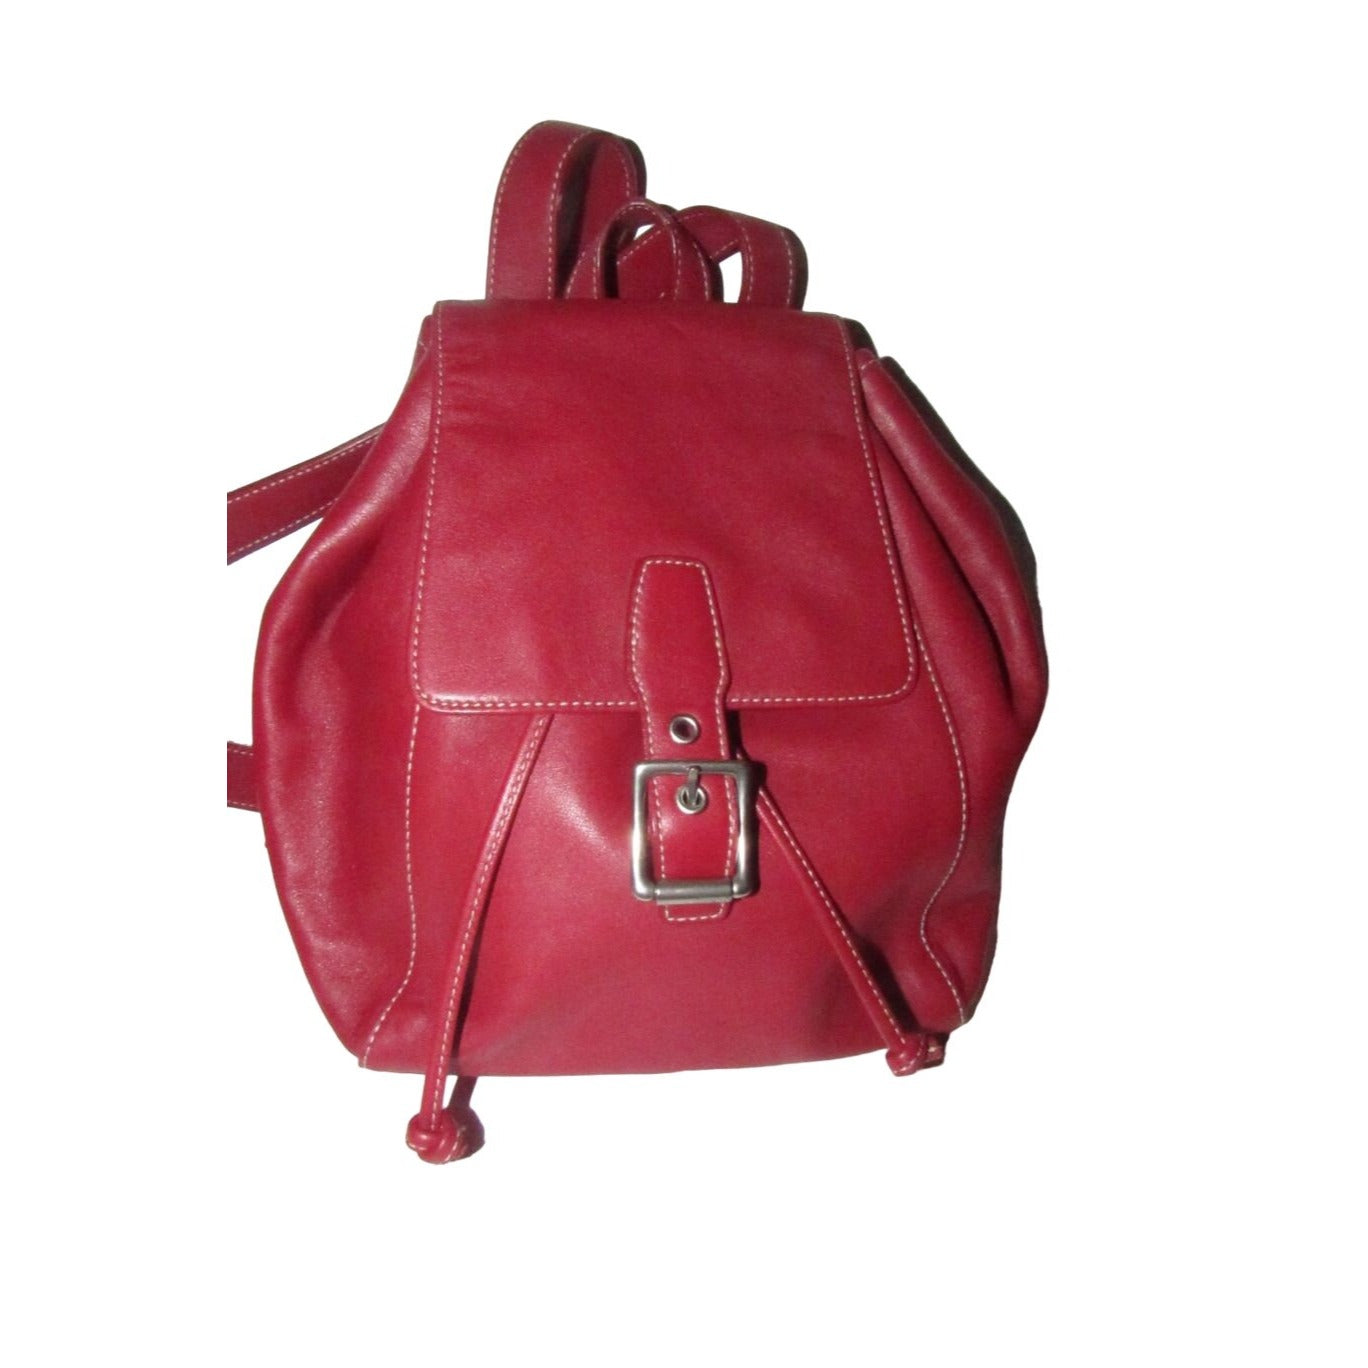 Coach, 'Legacy', large, sling style shoulder bag or backpack in buttery soft red leather with chrome accents and its Coach hangtag